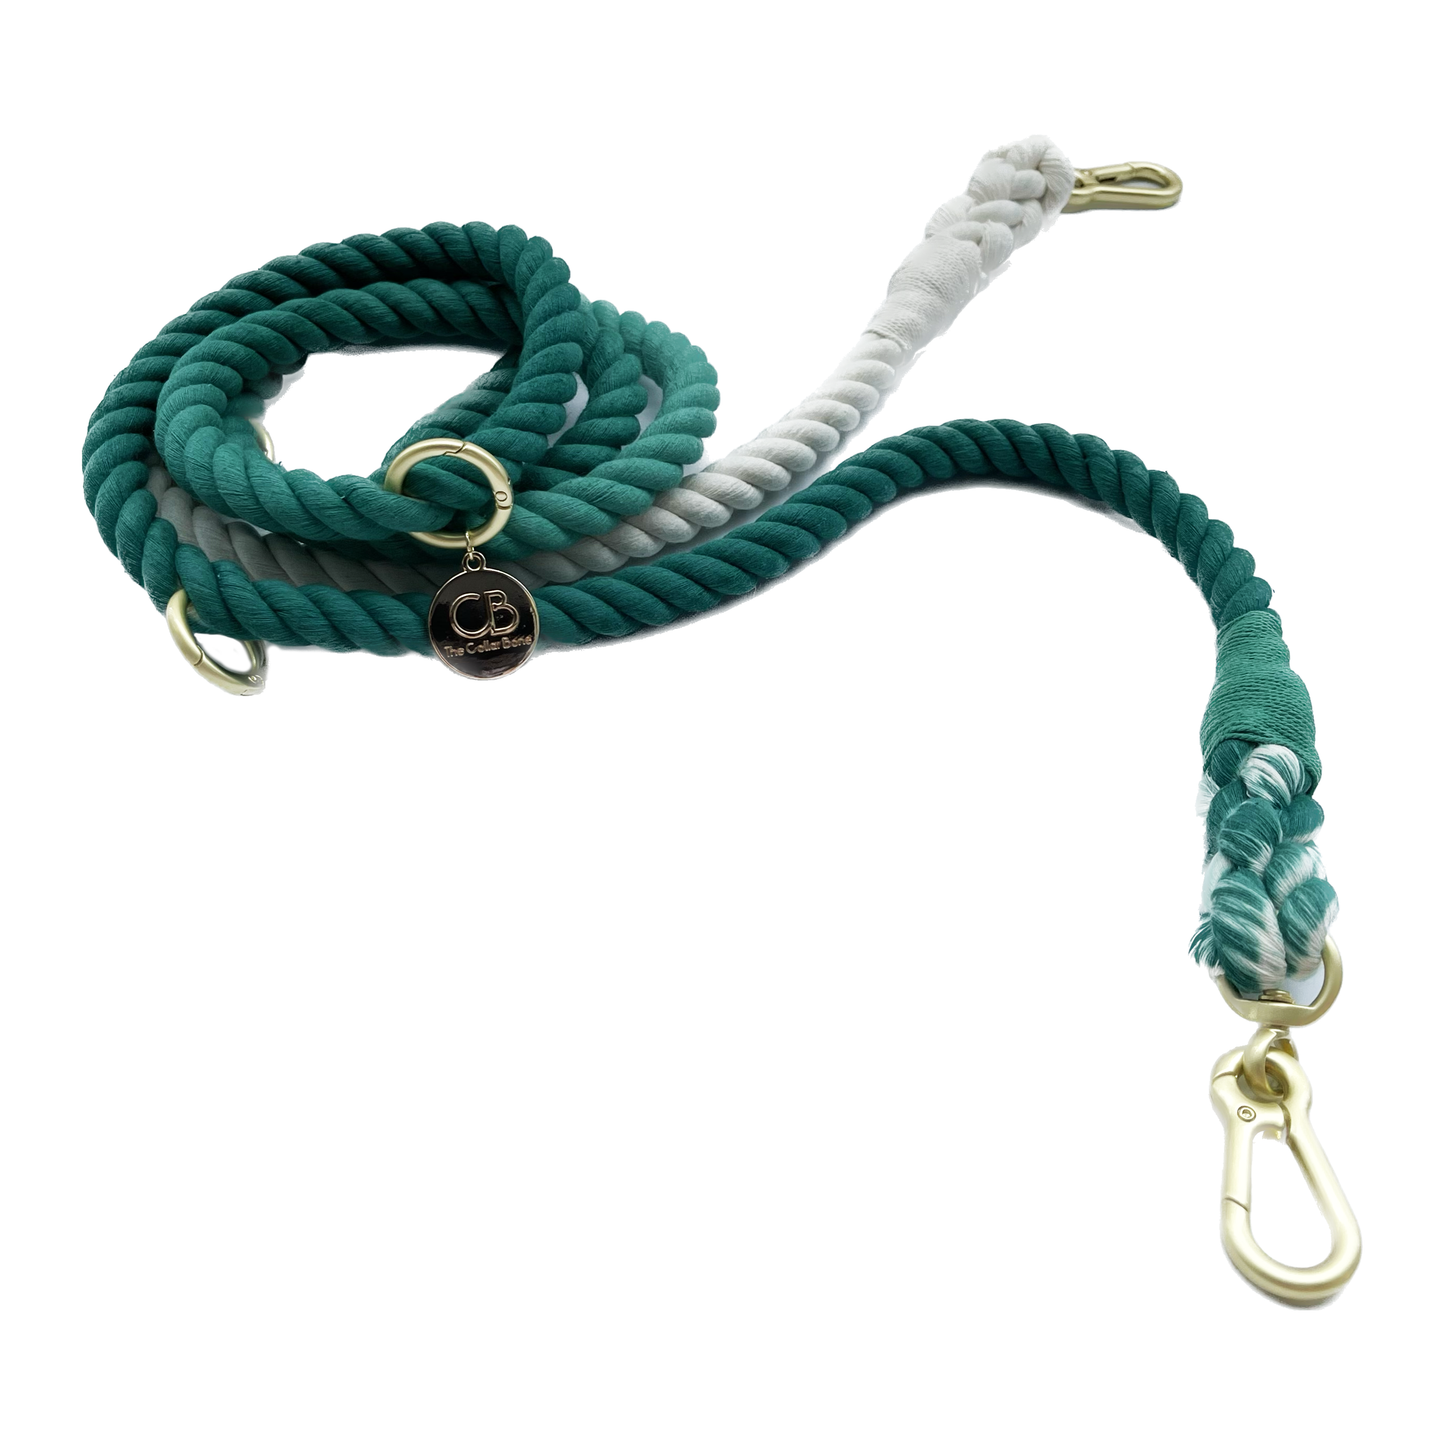 Multiway Handsfree Training Rope Leash in Bubblegum Sea Green and White